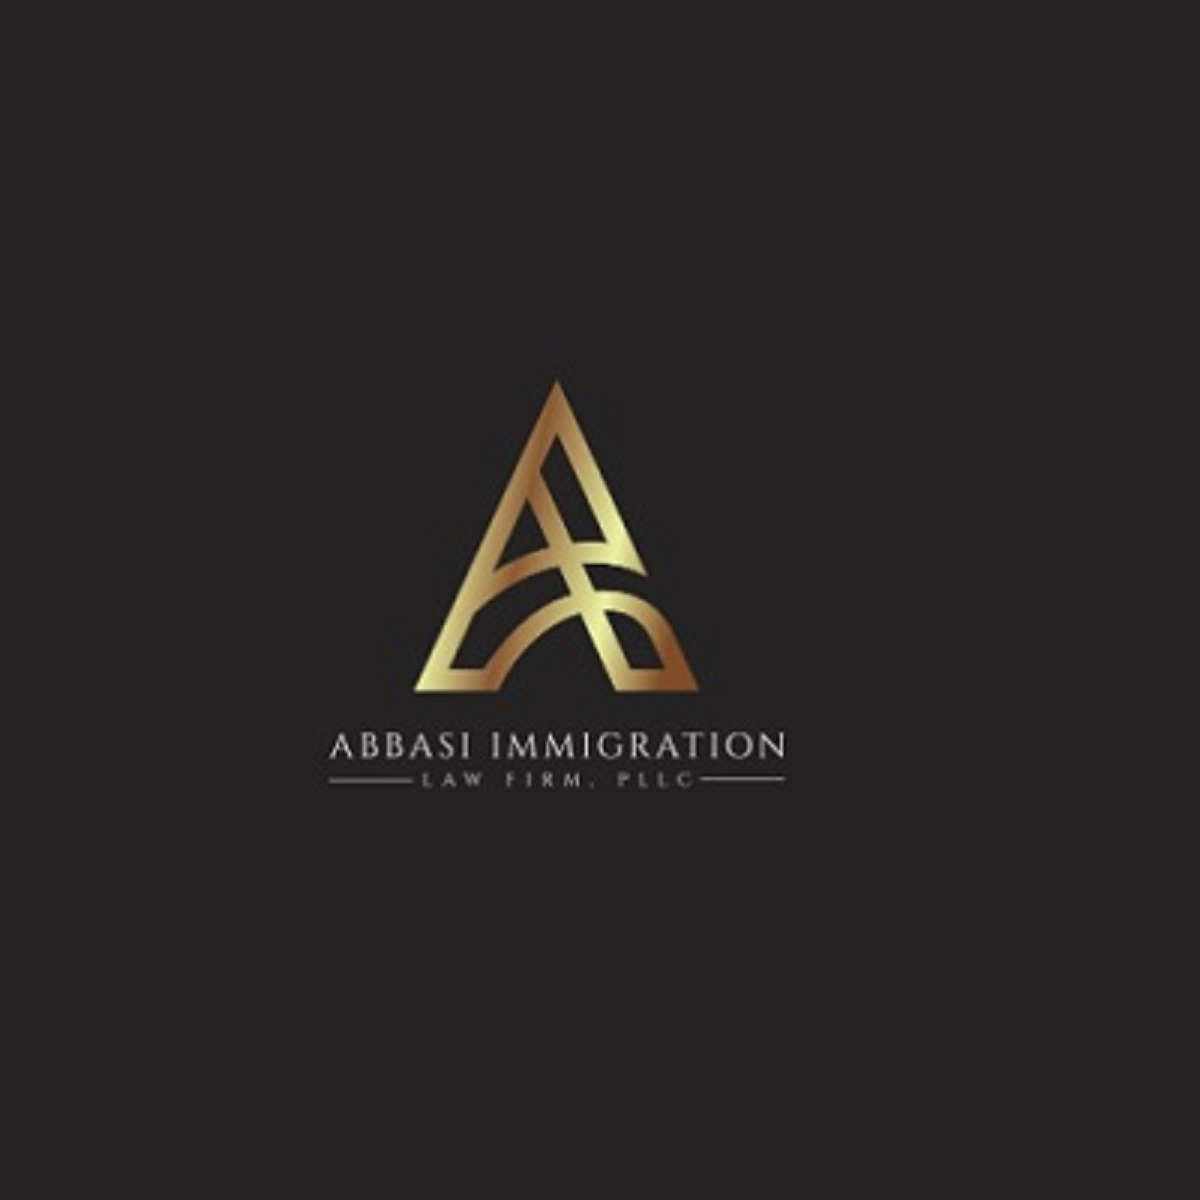 Abbasi Immigration Law Firm Cover Image